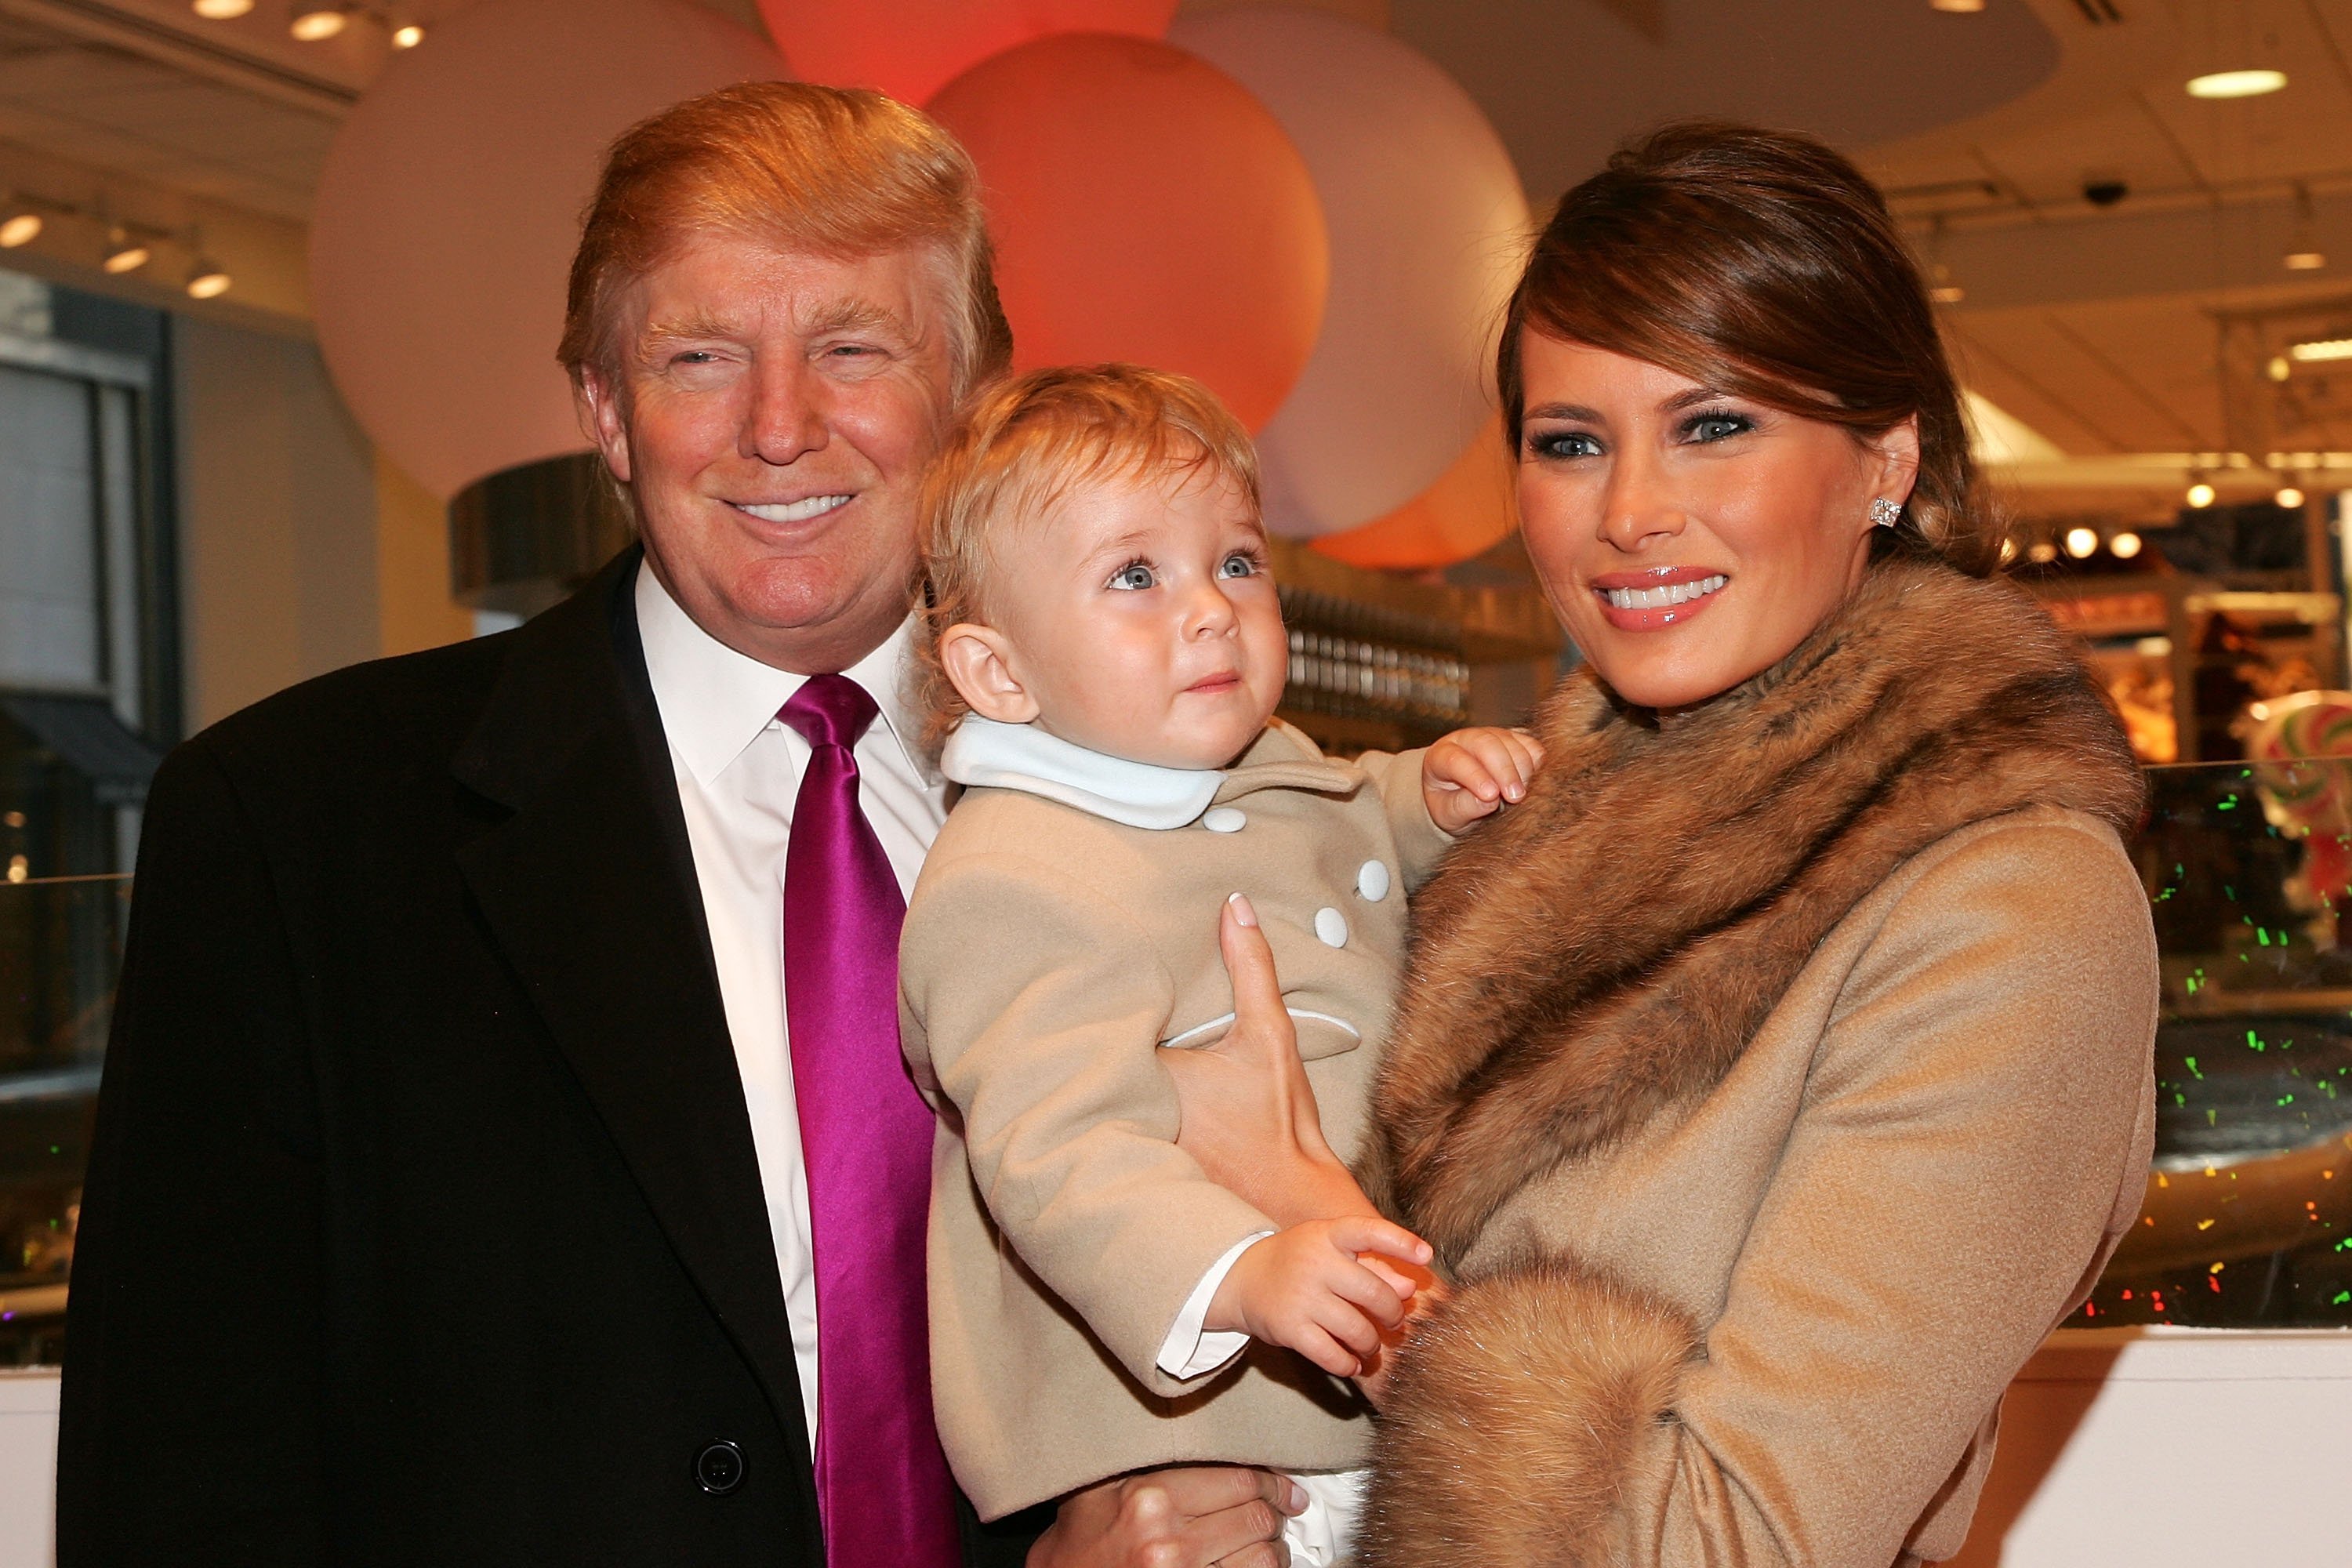 Donald Trump, Melania Trump and their son Barron at the Society of Memorial Sloan-Kettering Cancer Center's 16th Annual Bunny Hop March 13, 2007 | Photo: GettyImages